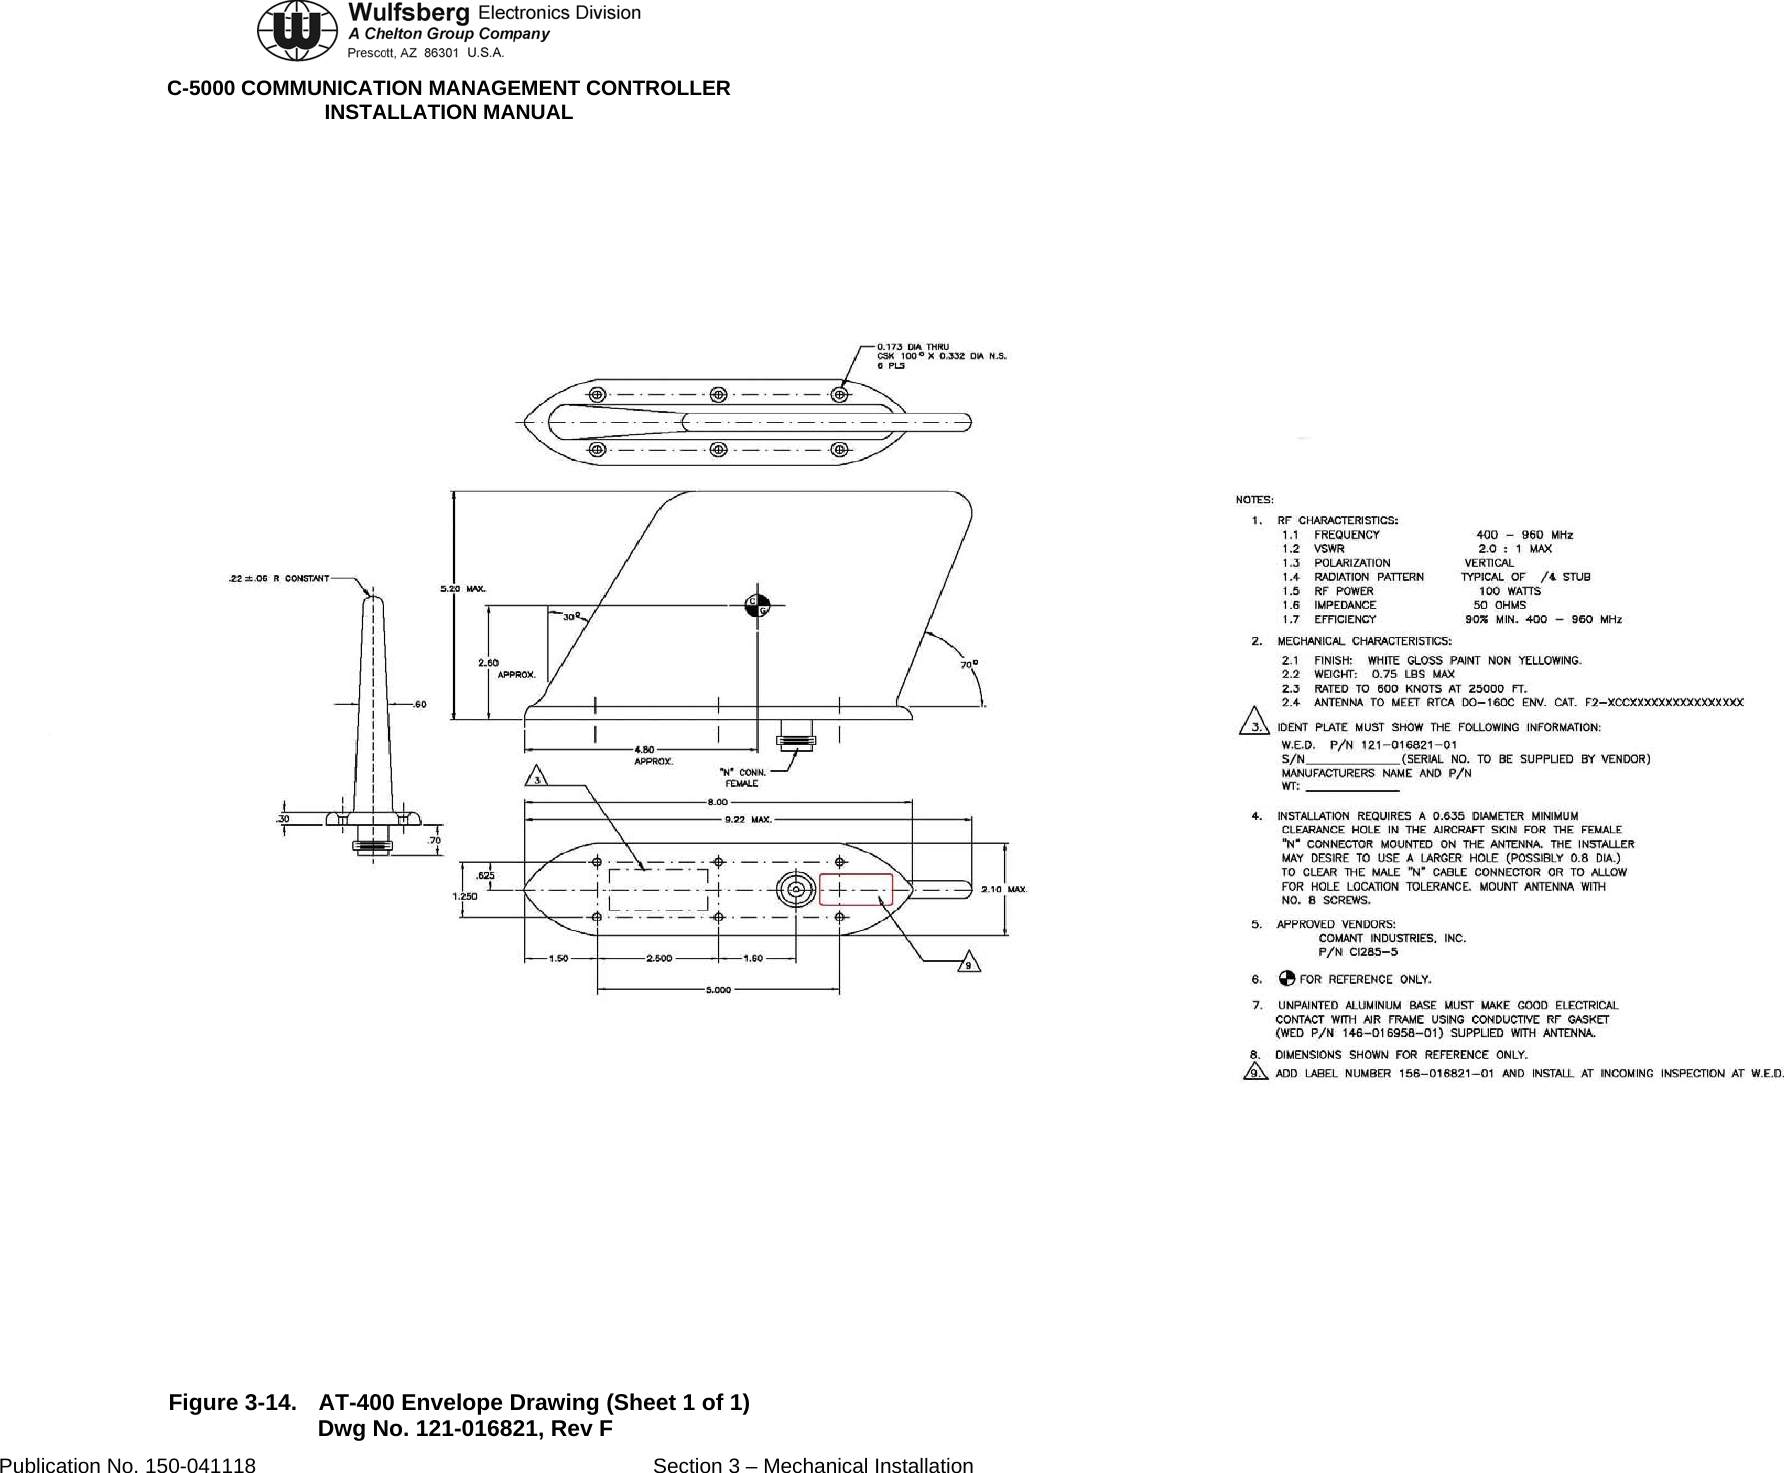  C-5000 COMMUNICATION MANAGEMENT CONTROLLER INSTALLATION MANUAL Publication No. 150-041118  Section 3 – Mechanical Installation  Figure 3-14.  AT-400 Envelope Drawing (Sheet 1 of 1) Dwg No. 121-016821, Rev F    